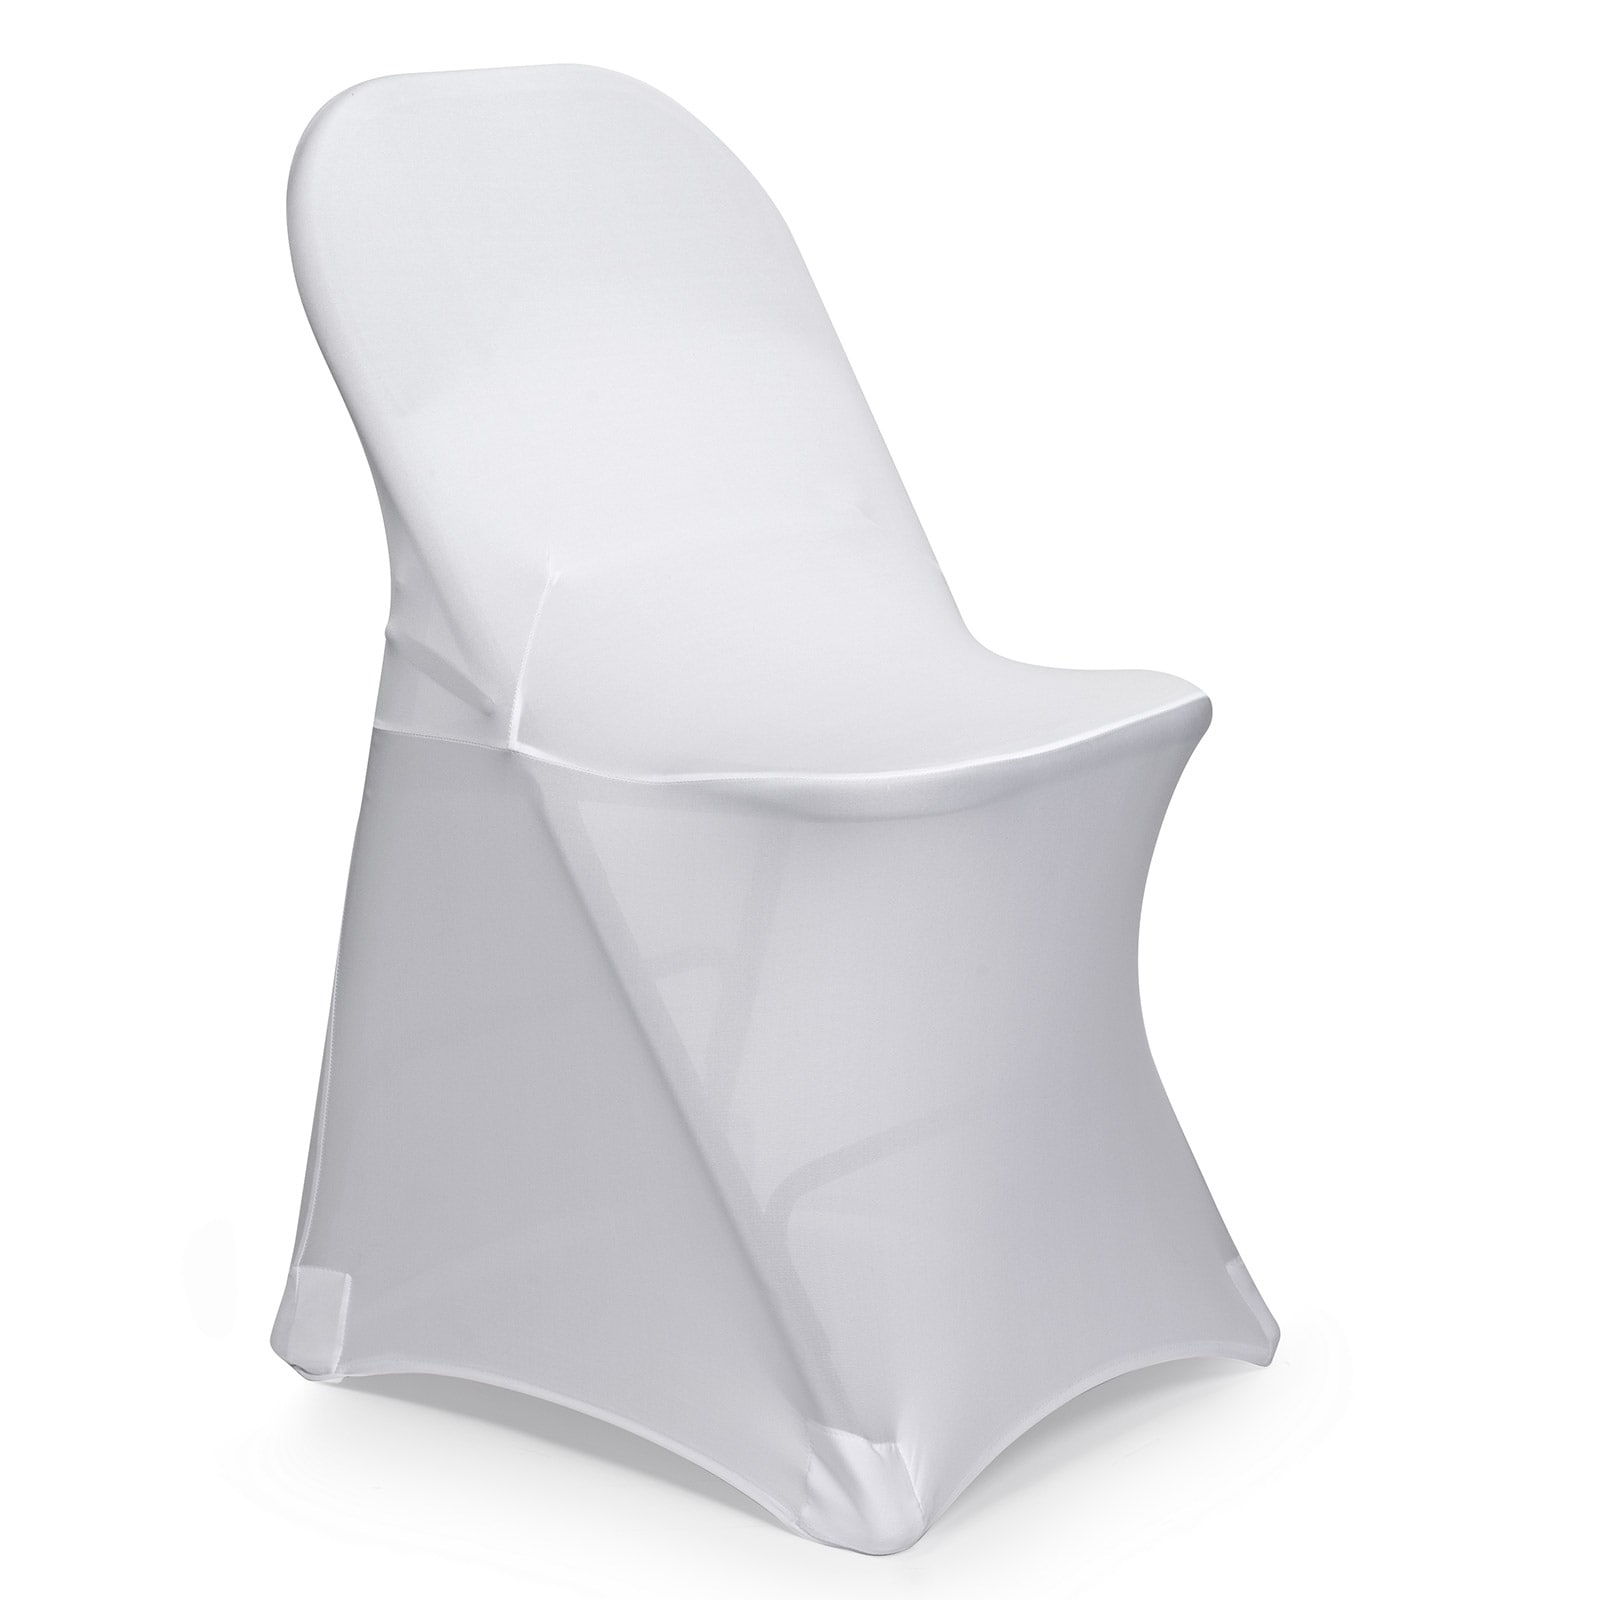 100-Count Spandex Folding Chair Covers - White - Bed Bath & Beyond